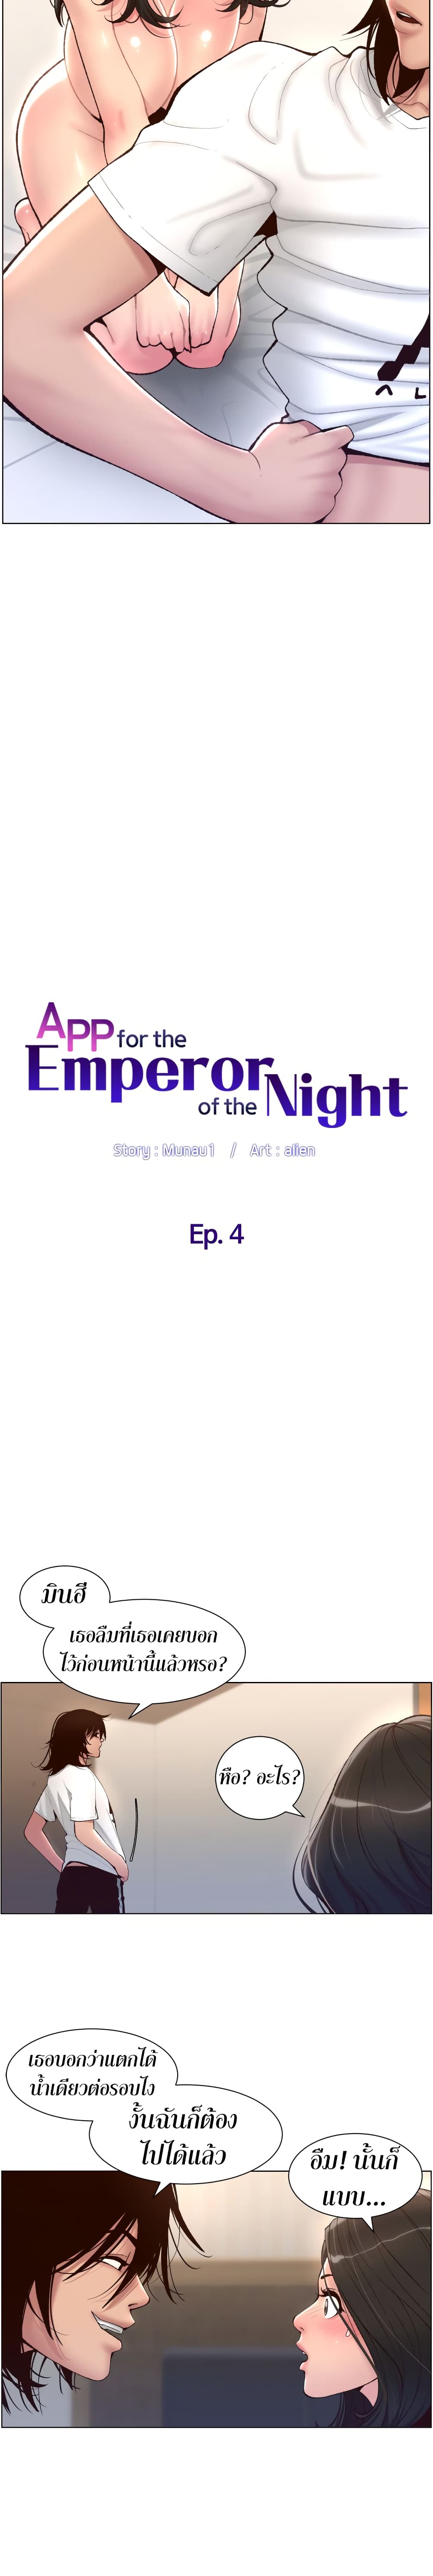 APP for the Emperor of the Night 4 (4)